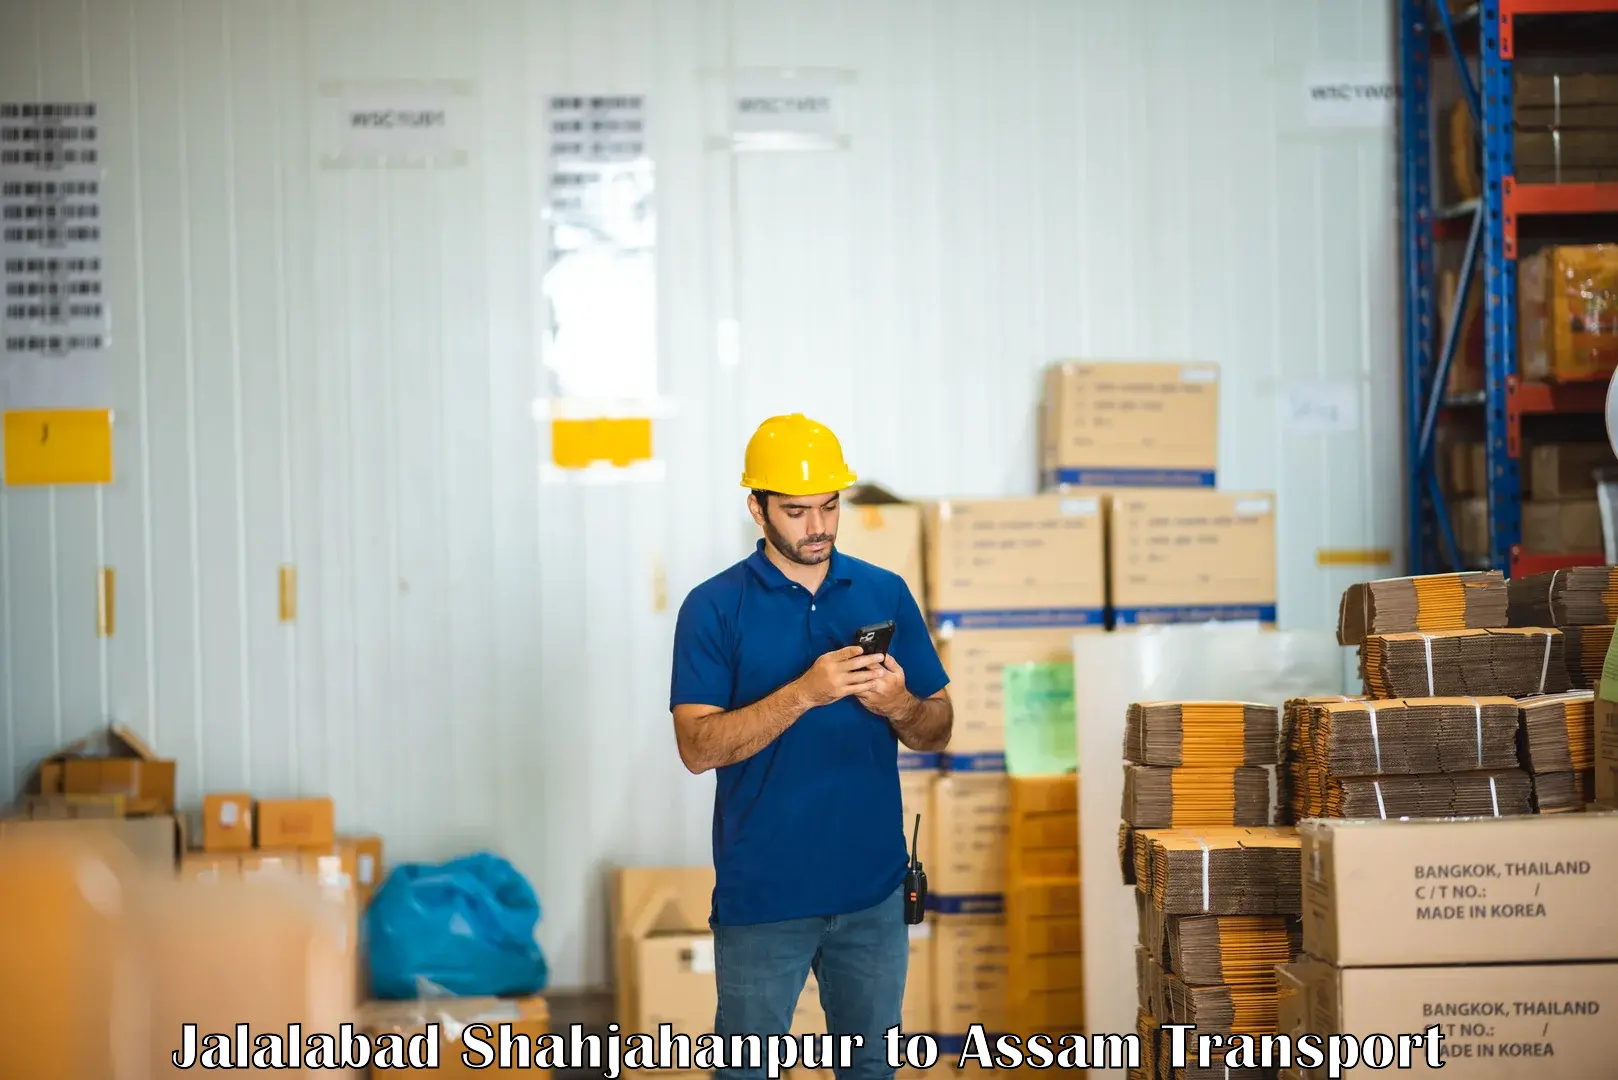 Container transportation services Jalalabad Shahjahanpur to Dibrugarh University